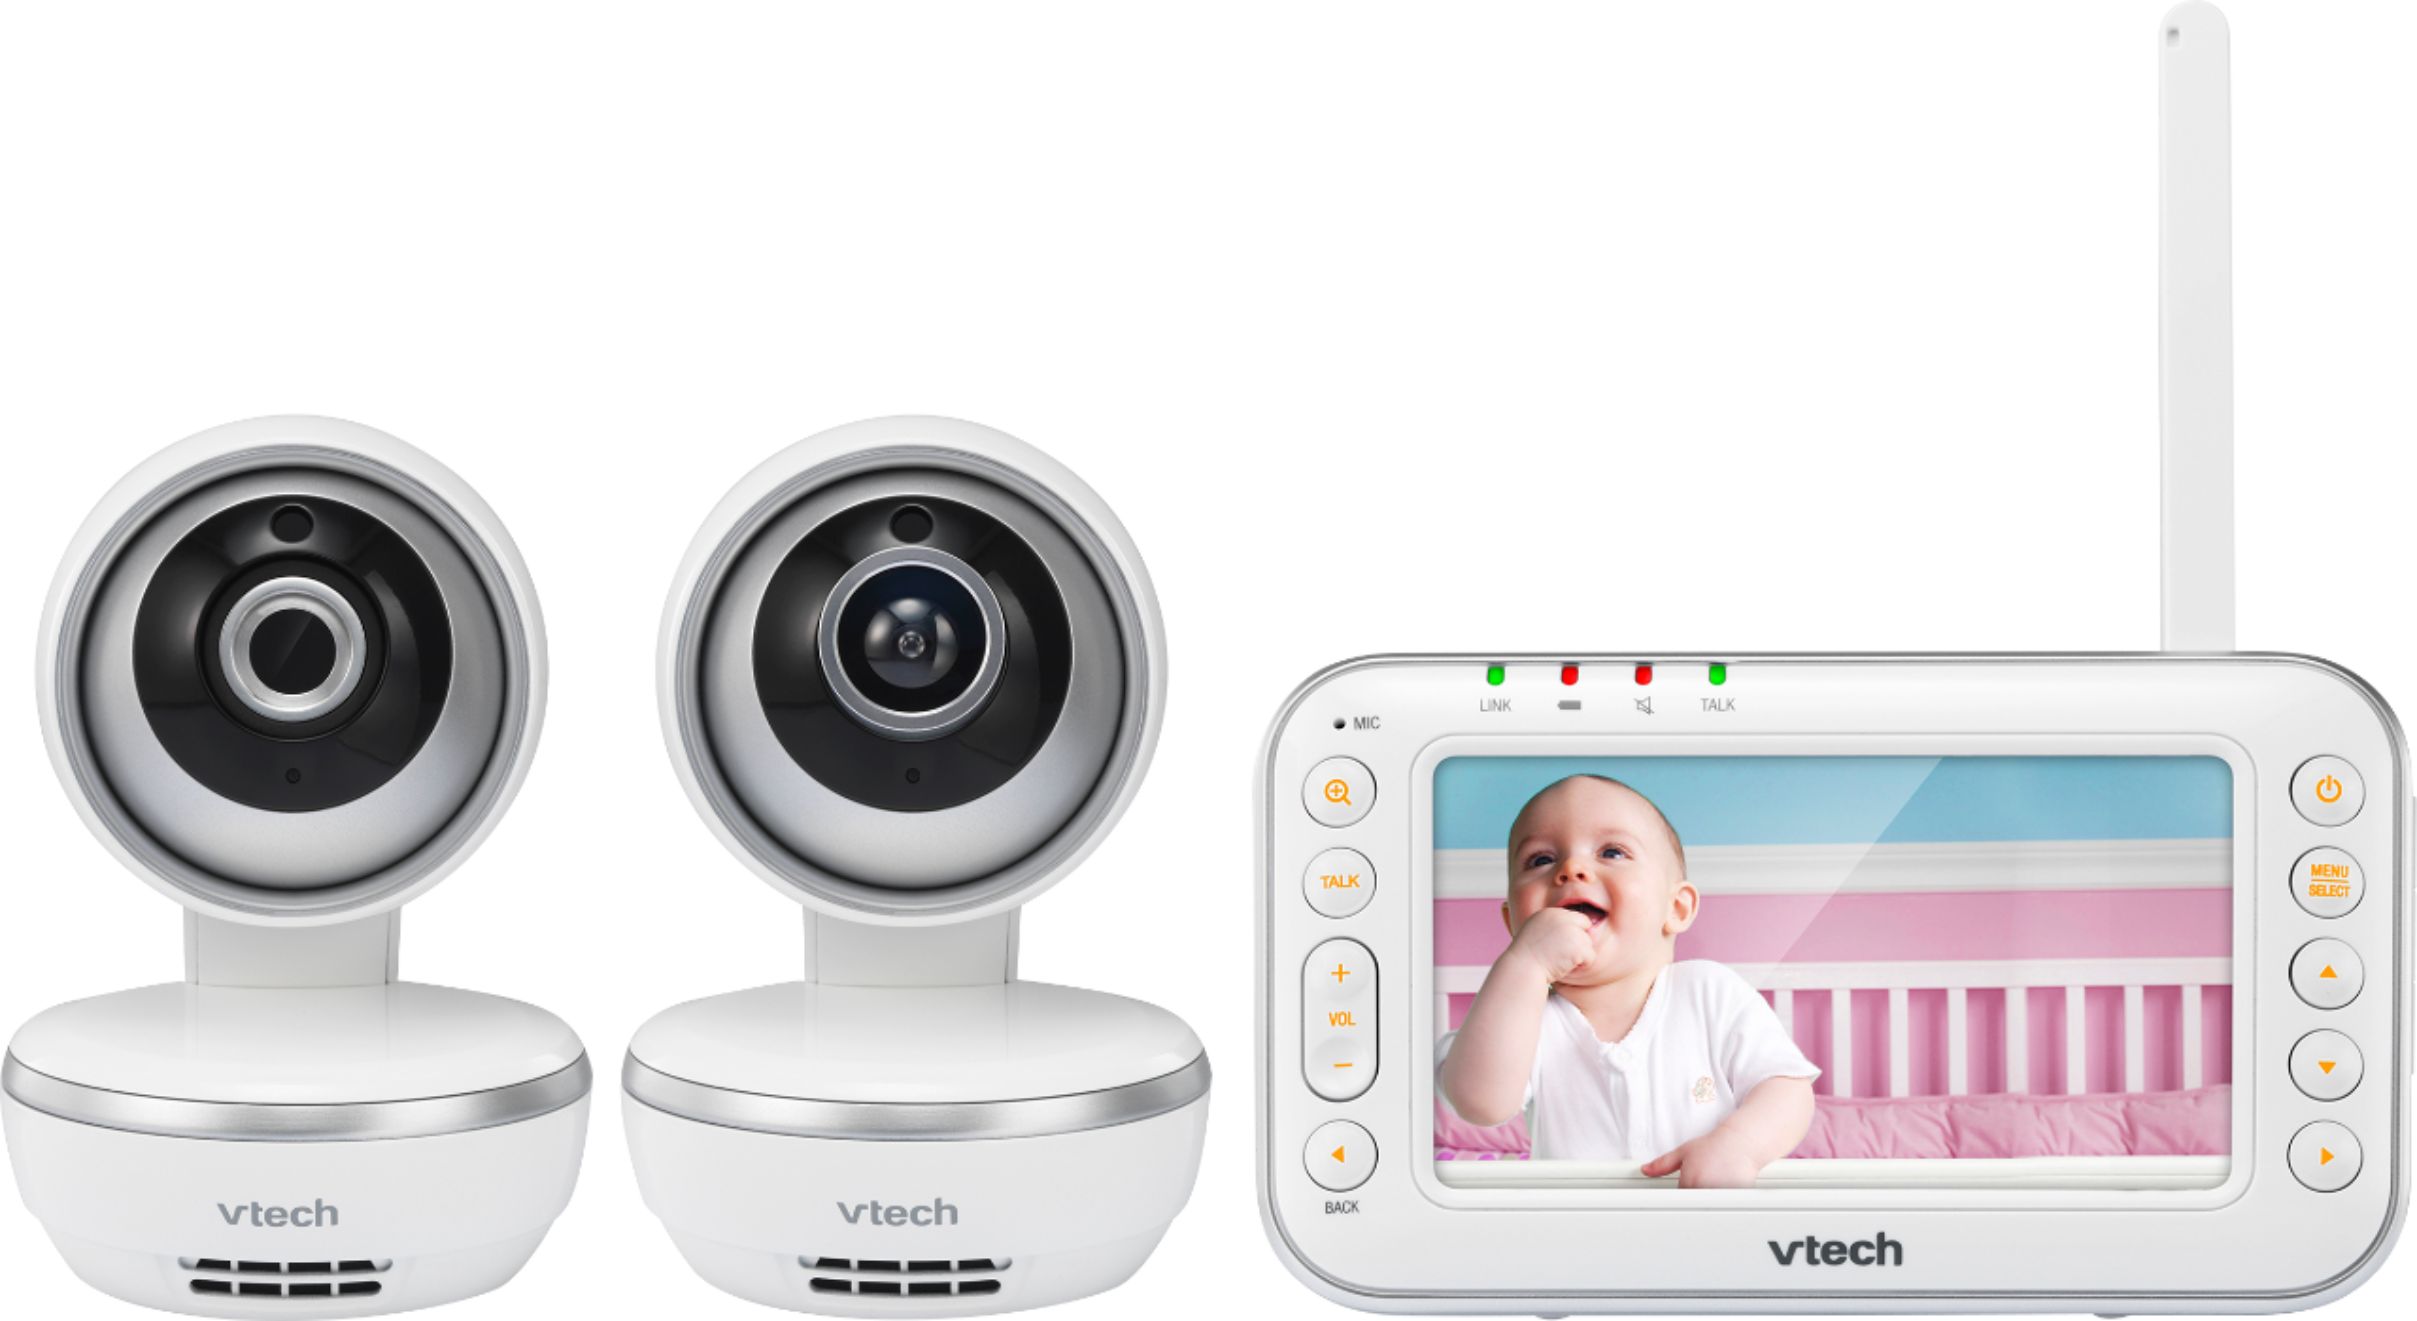 VTech VM991 Safe & Sound Expandable HD Video Baby Monitor Review